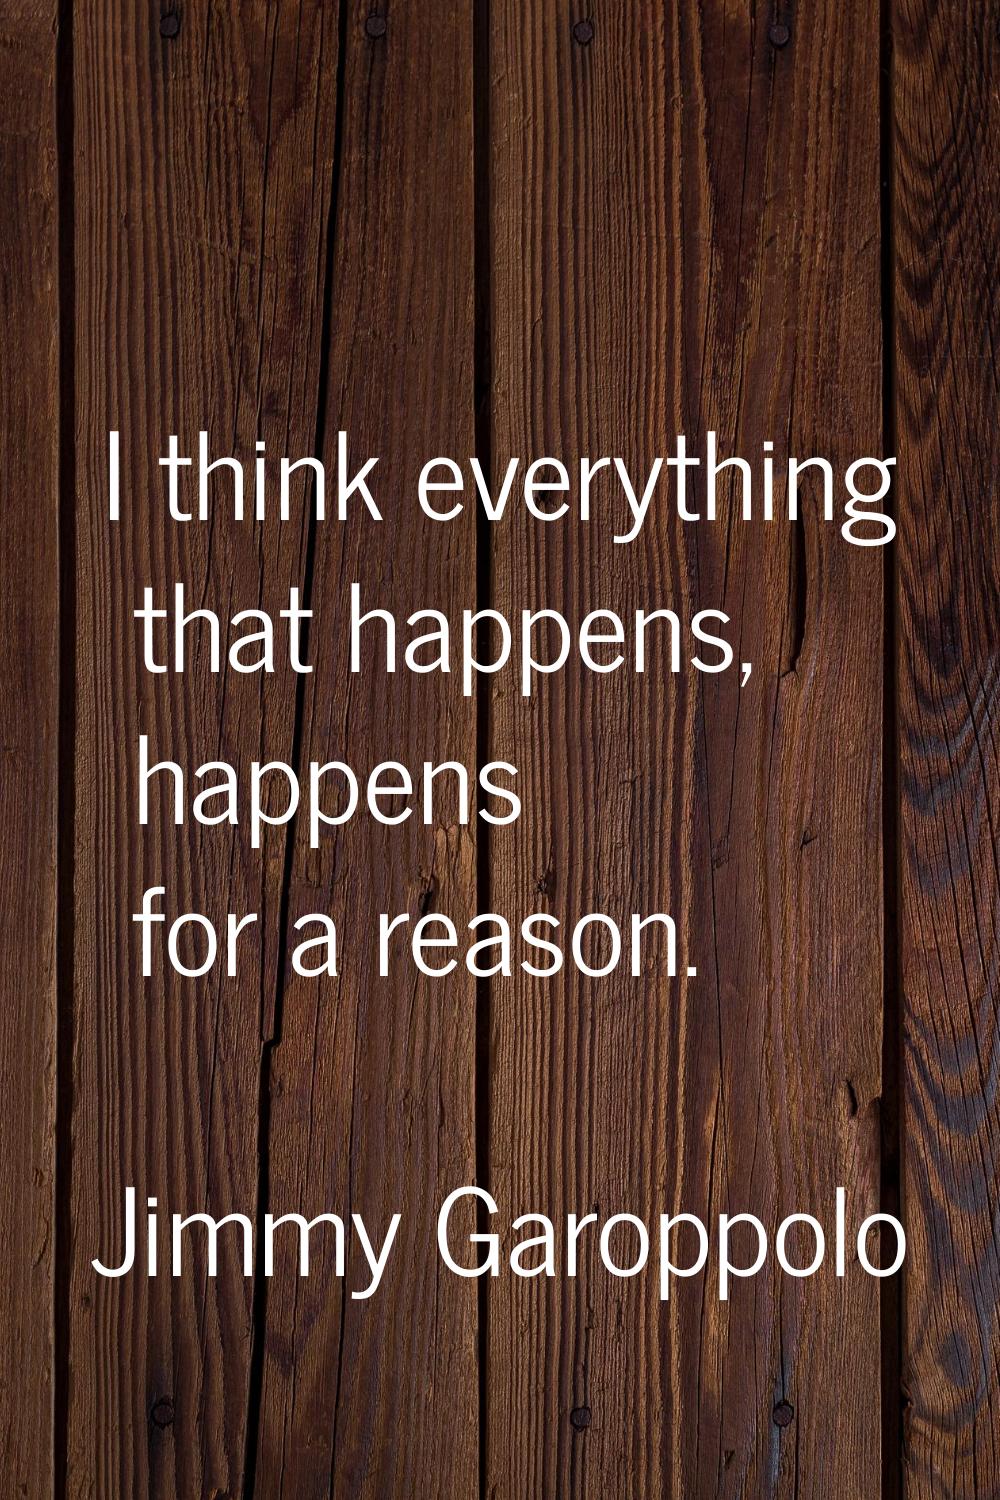 I think everything that happens, happens for a reason.